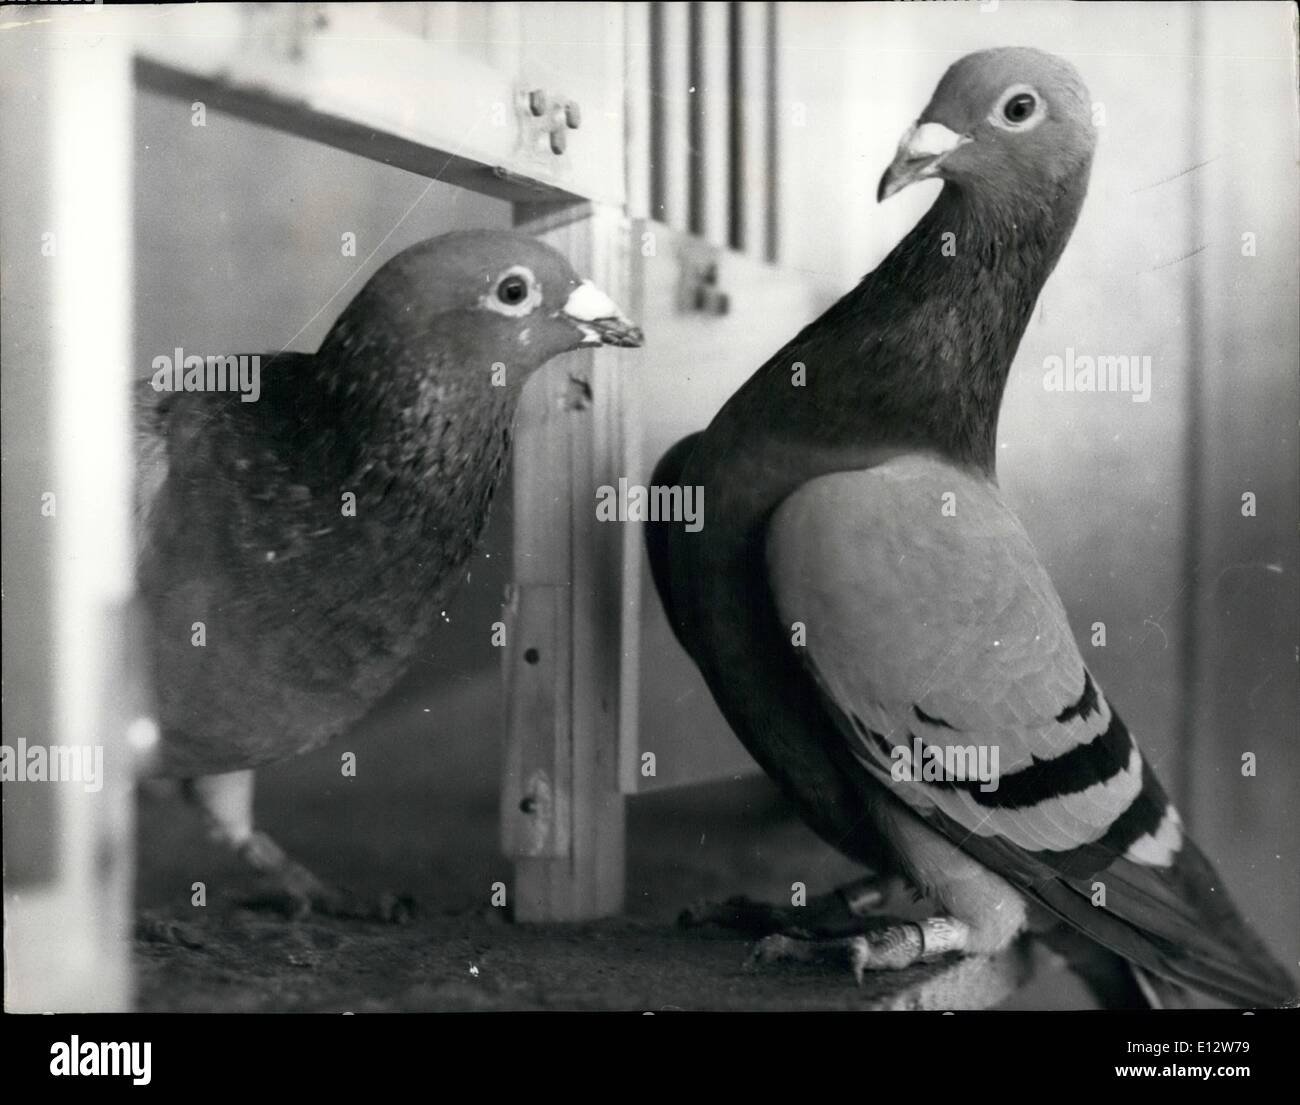 Feb. 25, 2012 - A world beater. A bit of a flutter was caused in the acing pigeon world recently when ''Scout'' was sold for a record price of ,500. Scout was bought from a French breeder by pirgeon fancier, Stanley Biss, of Brundall, near Norwich, and is a champion bred from champions. At the age of six he is said to fly faster and more accurately than any pigeon in the world, which is why scout has been retired from the racing circuits and is now spending his time producing more super birds. photo shows Scout, on left, ingited a bird home at Brundall, near Norwich. Stock Photo